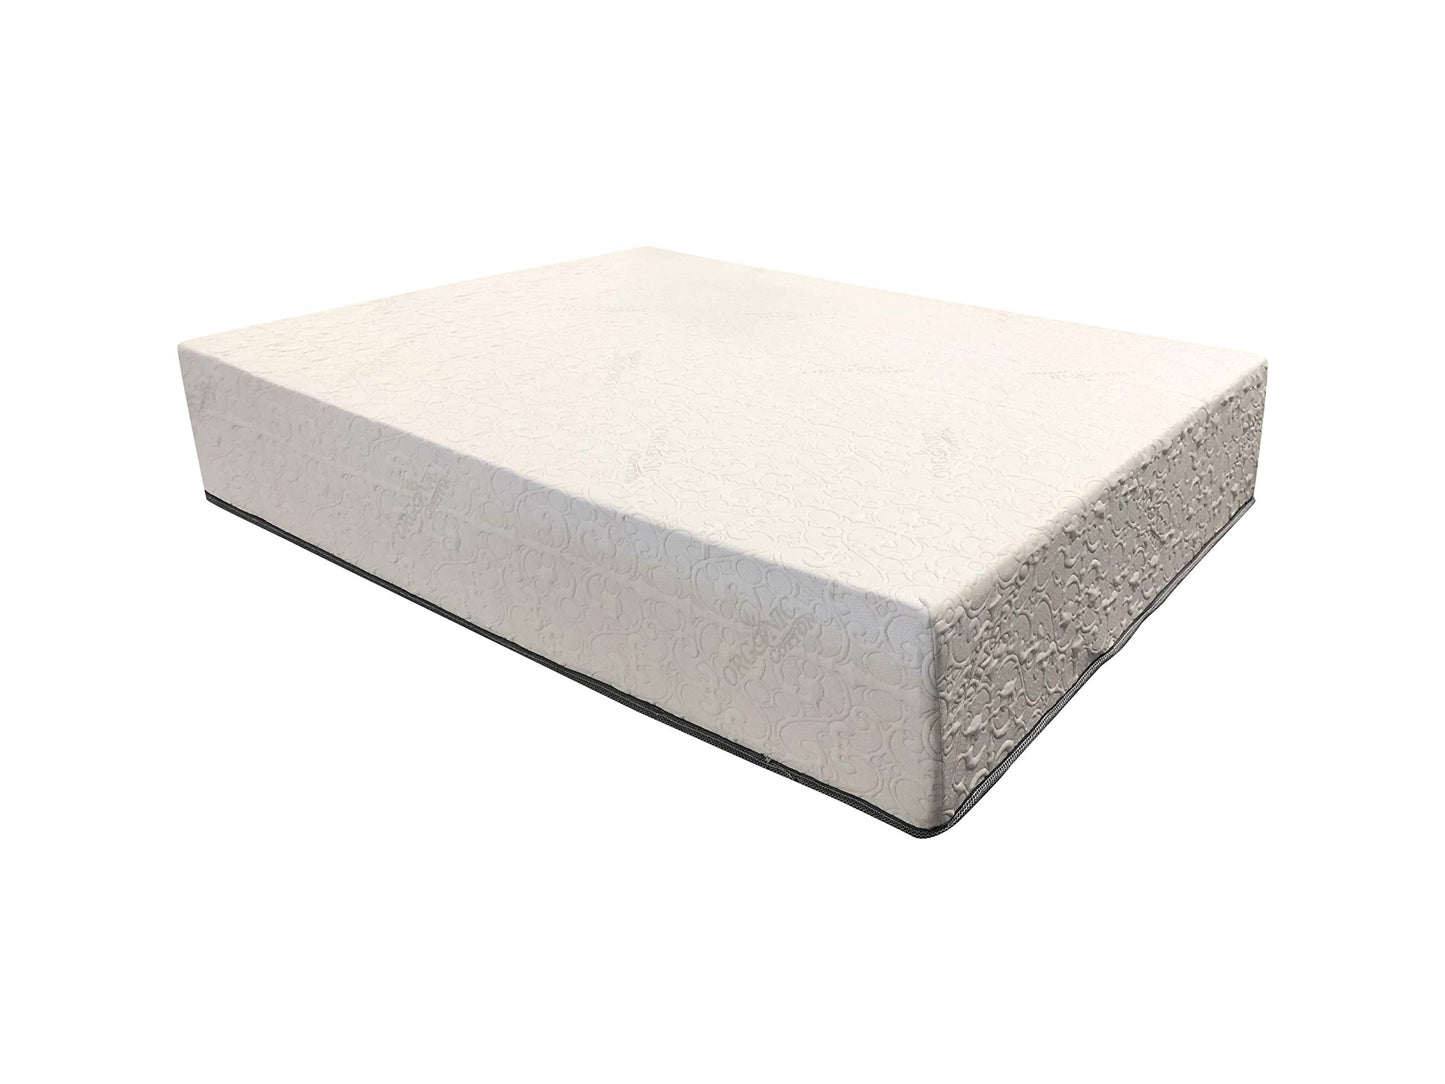 Purest of America 8 Inch Double Layer Memory Foam Mattress, Olympic Queen